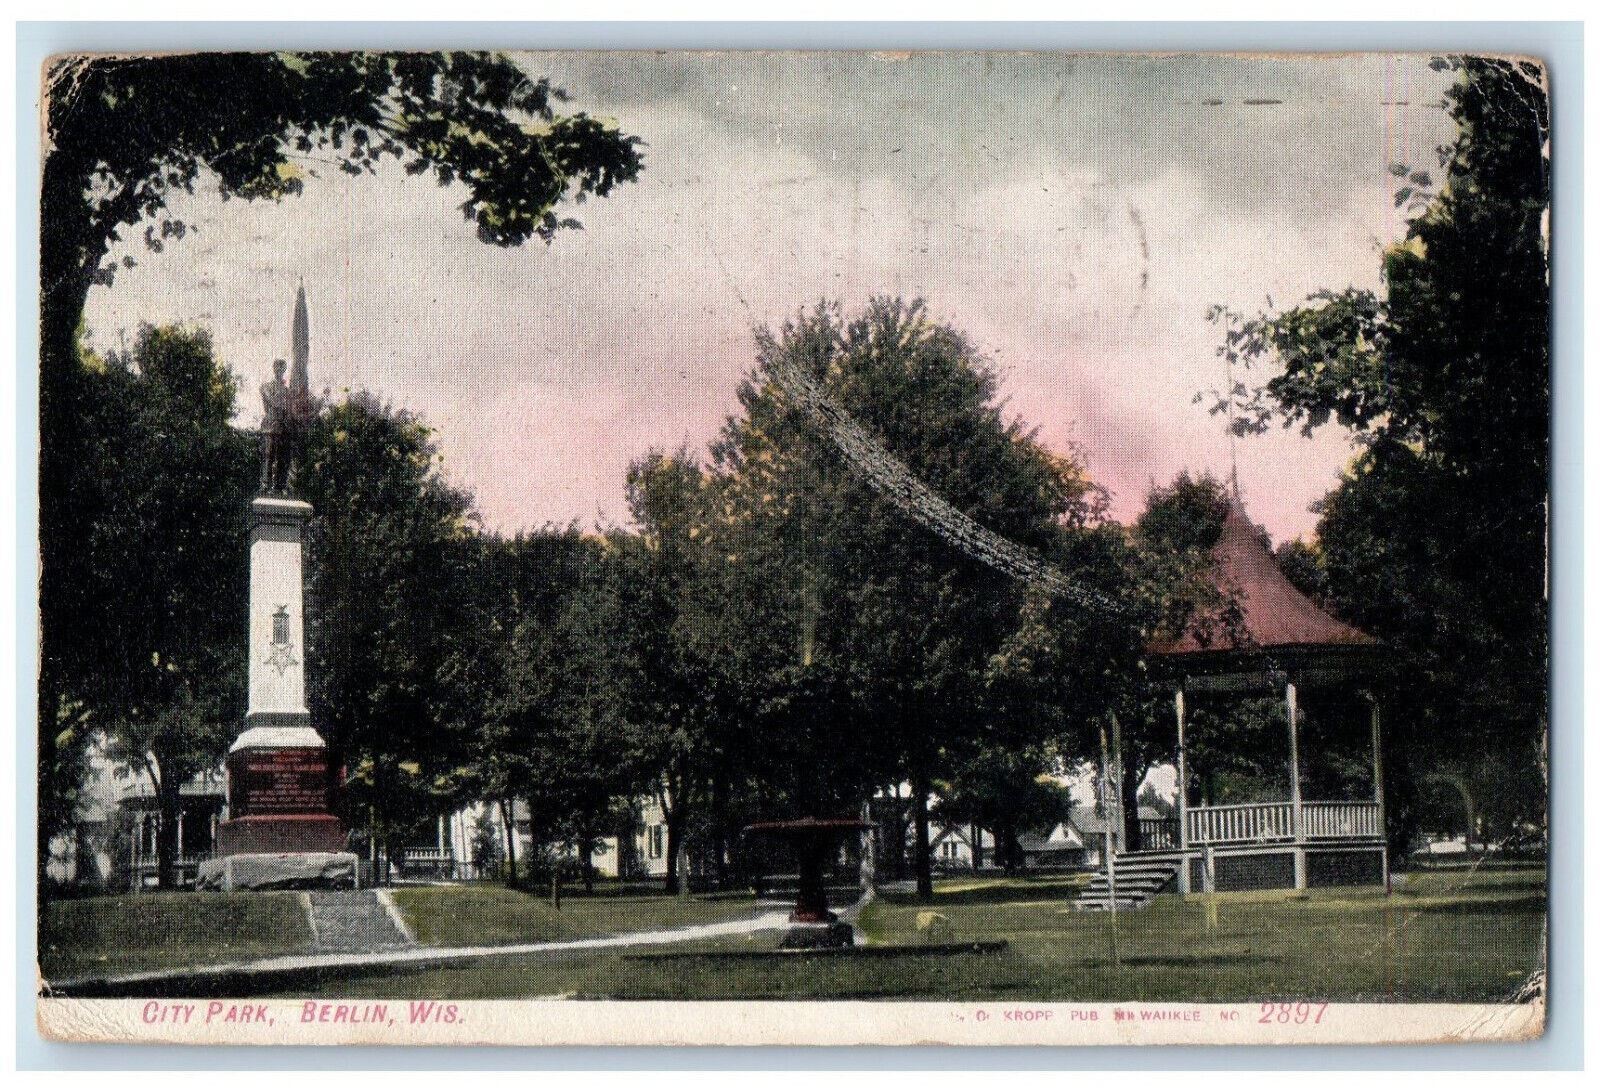 1910 Monument Bandstand City Park Berlin Wisconsin WI Posted Postcard